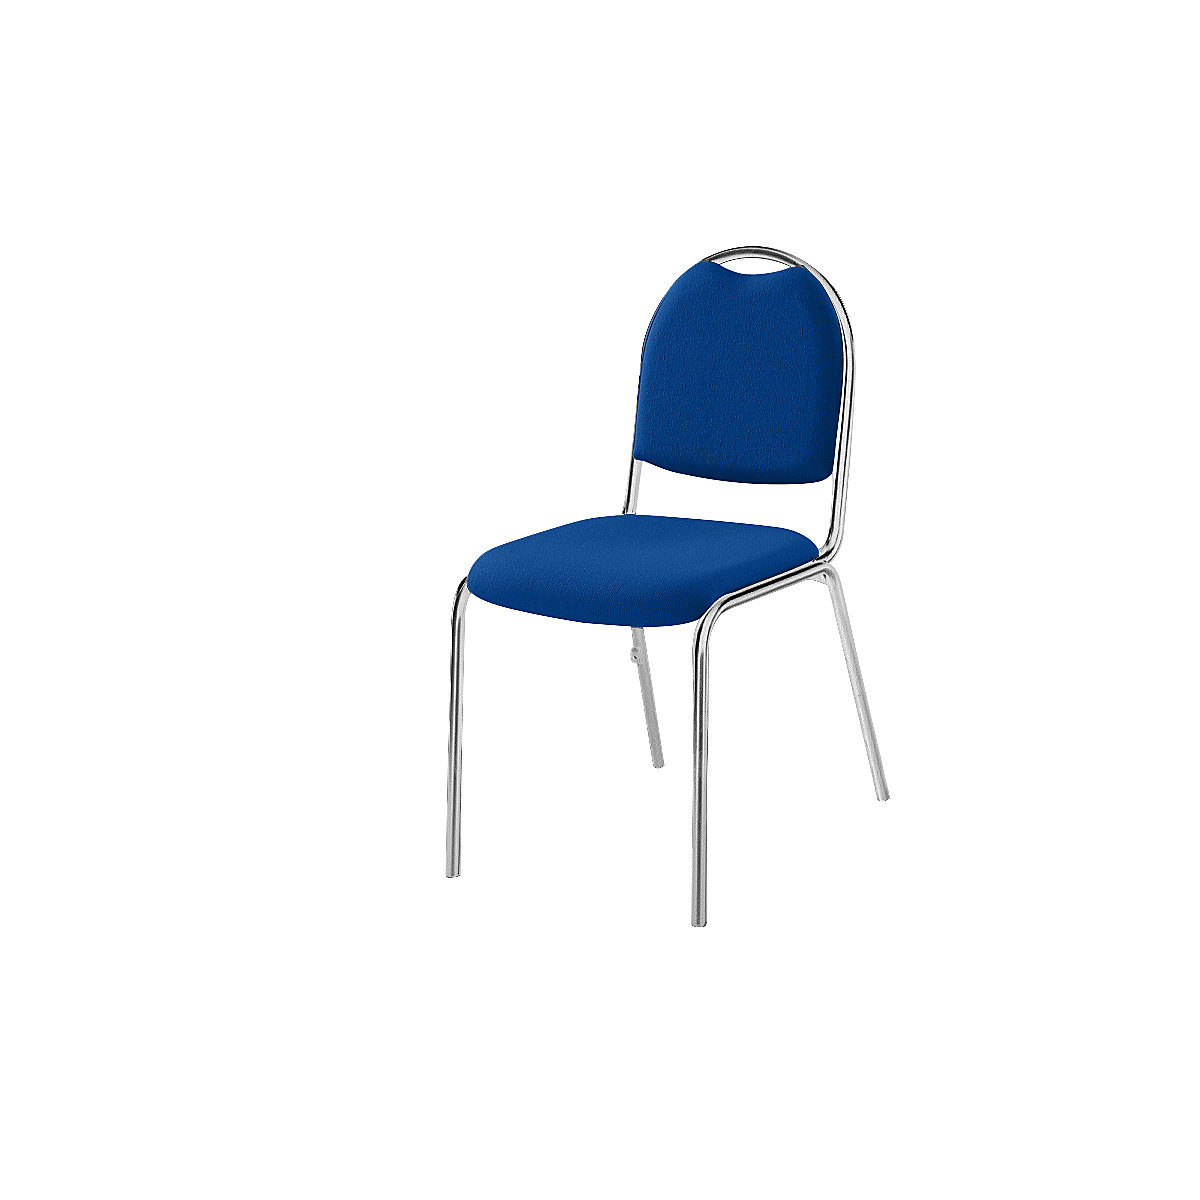 Conference and meeting room chair – eurokraft pro